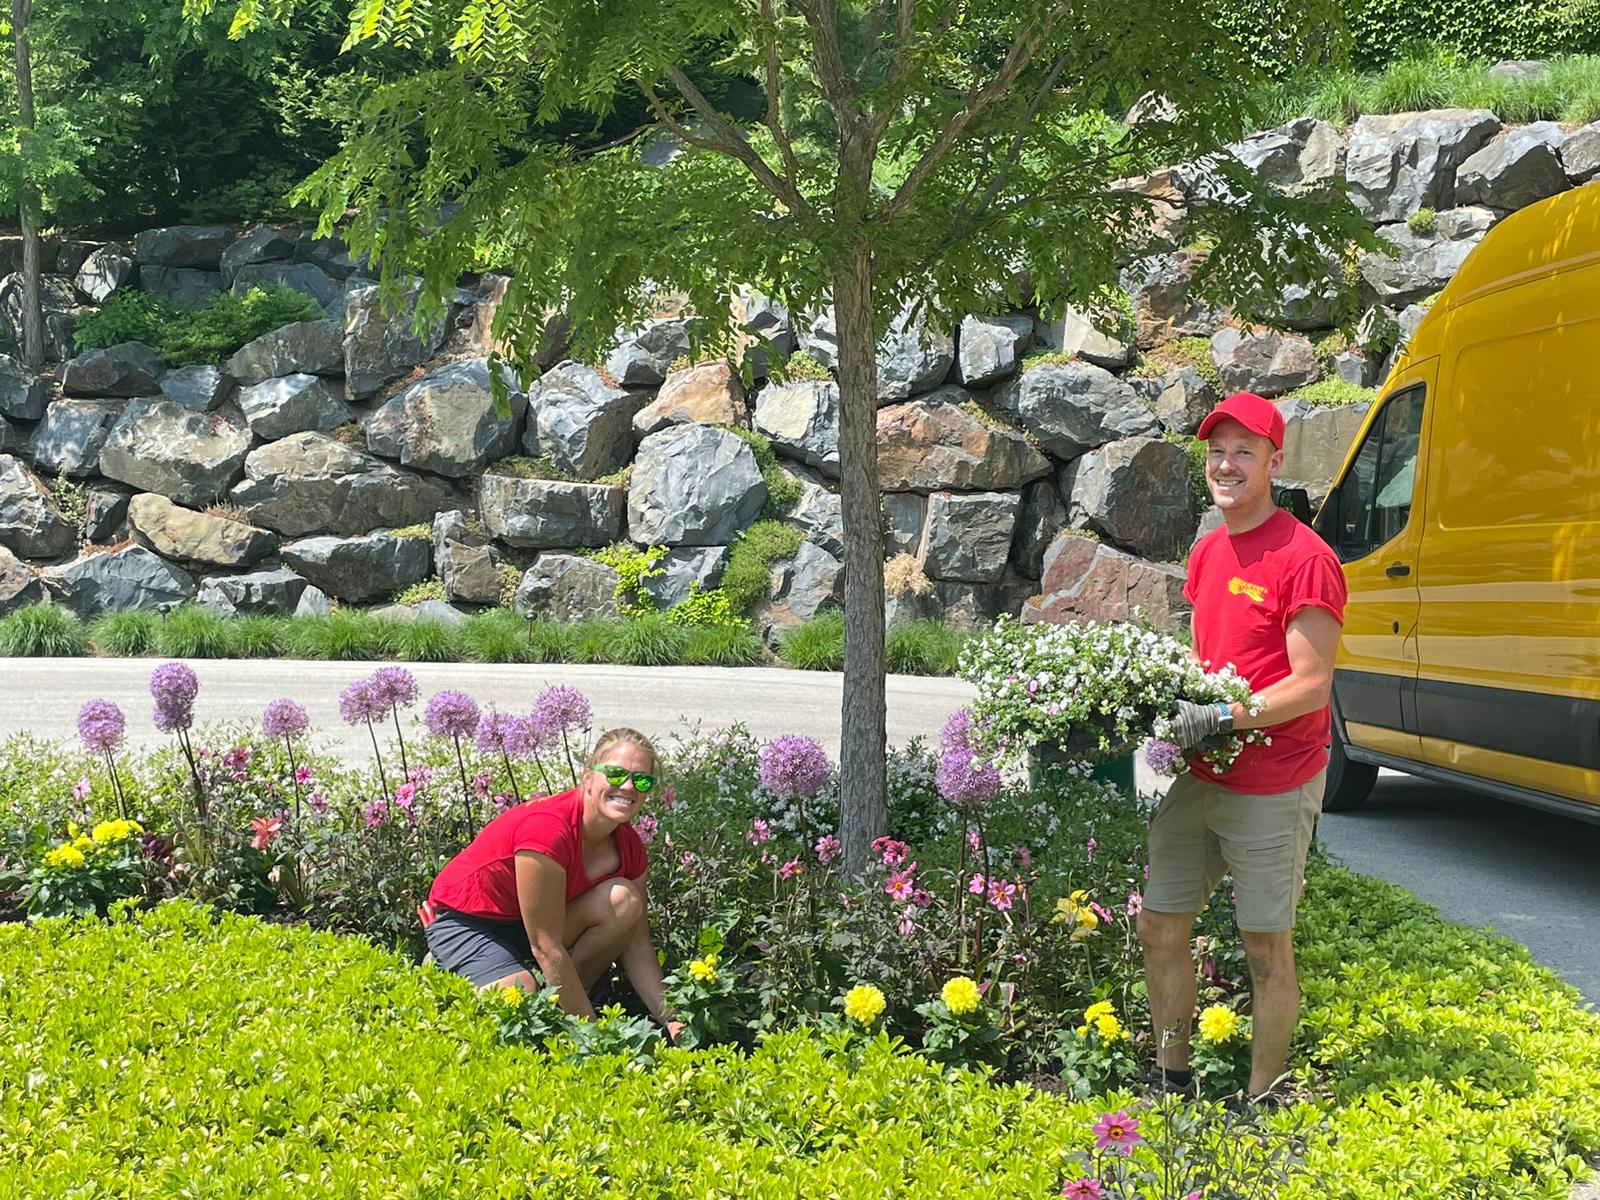 Two persons in red shirts and caps are gardening near a stone wall, with a yellow van parked nearby, surrounded by greenery and blooming flowers.